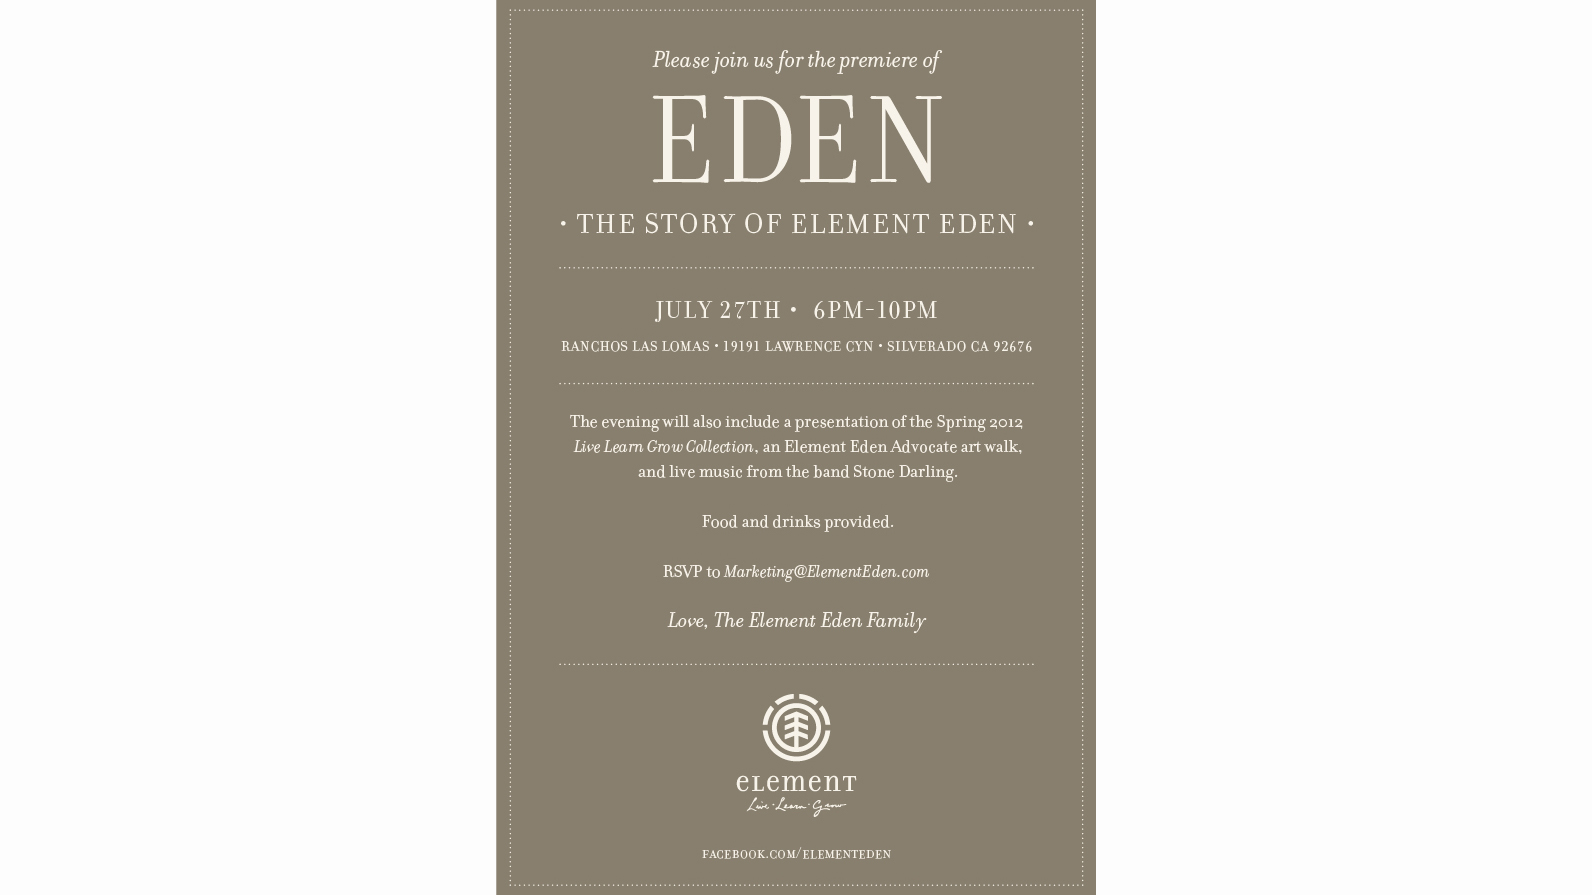 The Story of Element Eden exhibition